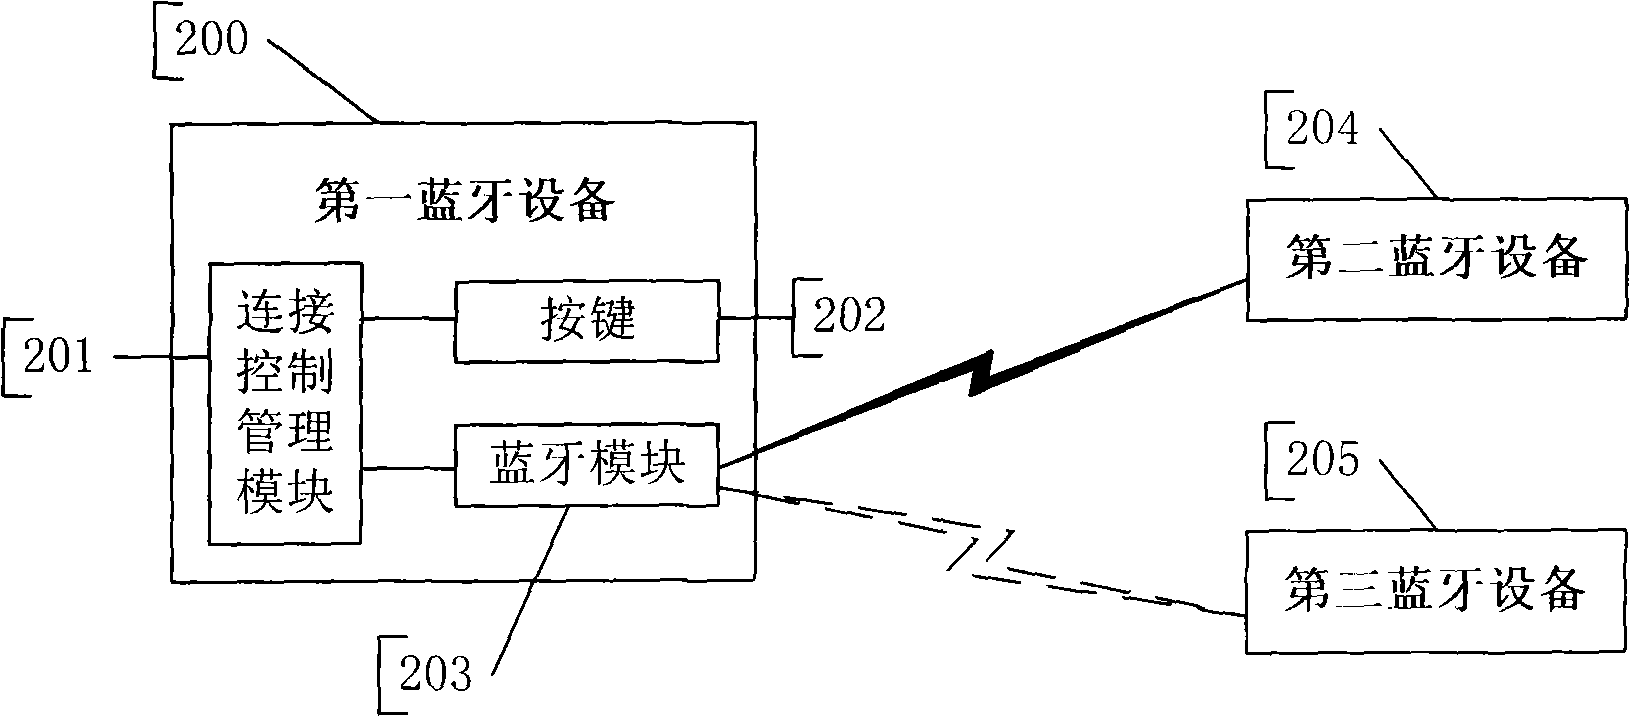 Method, apparatus and system for triggering automatic switchover of Bluetooth connecting device by key pressing